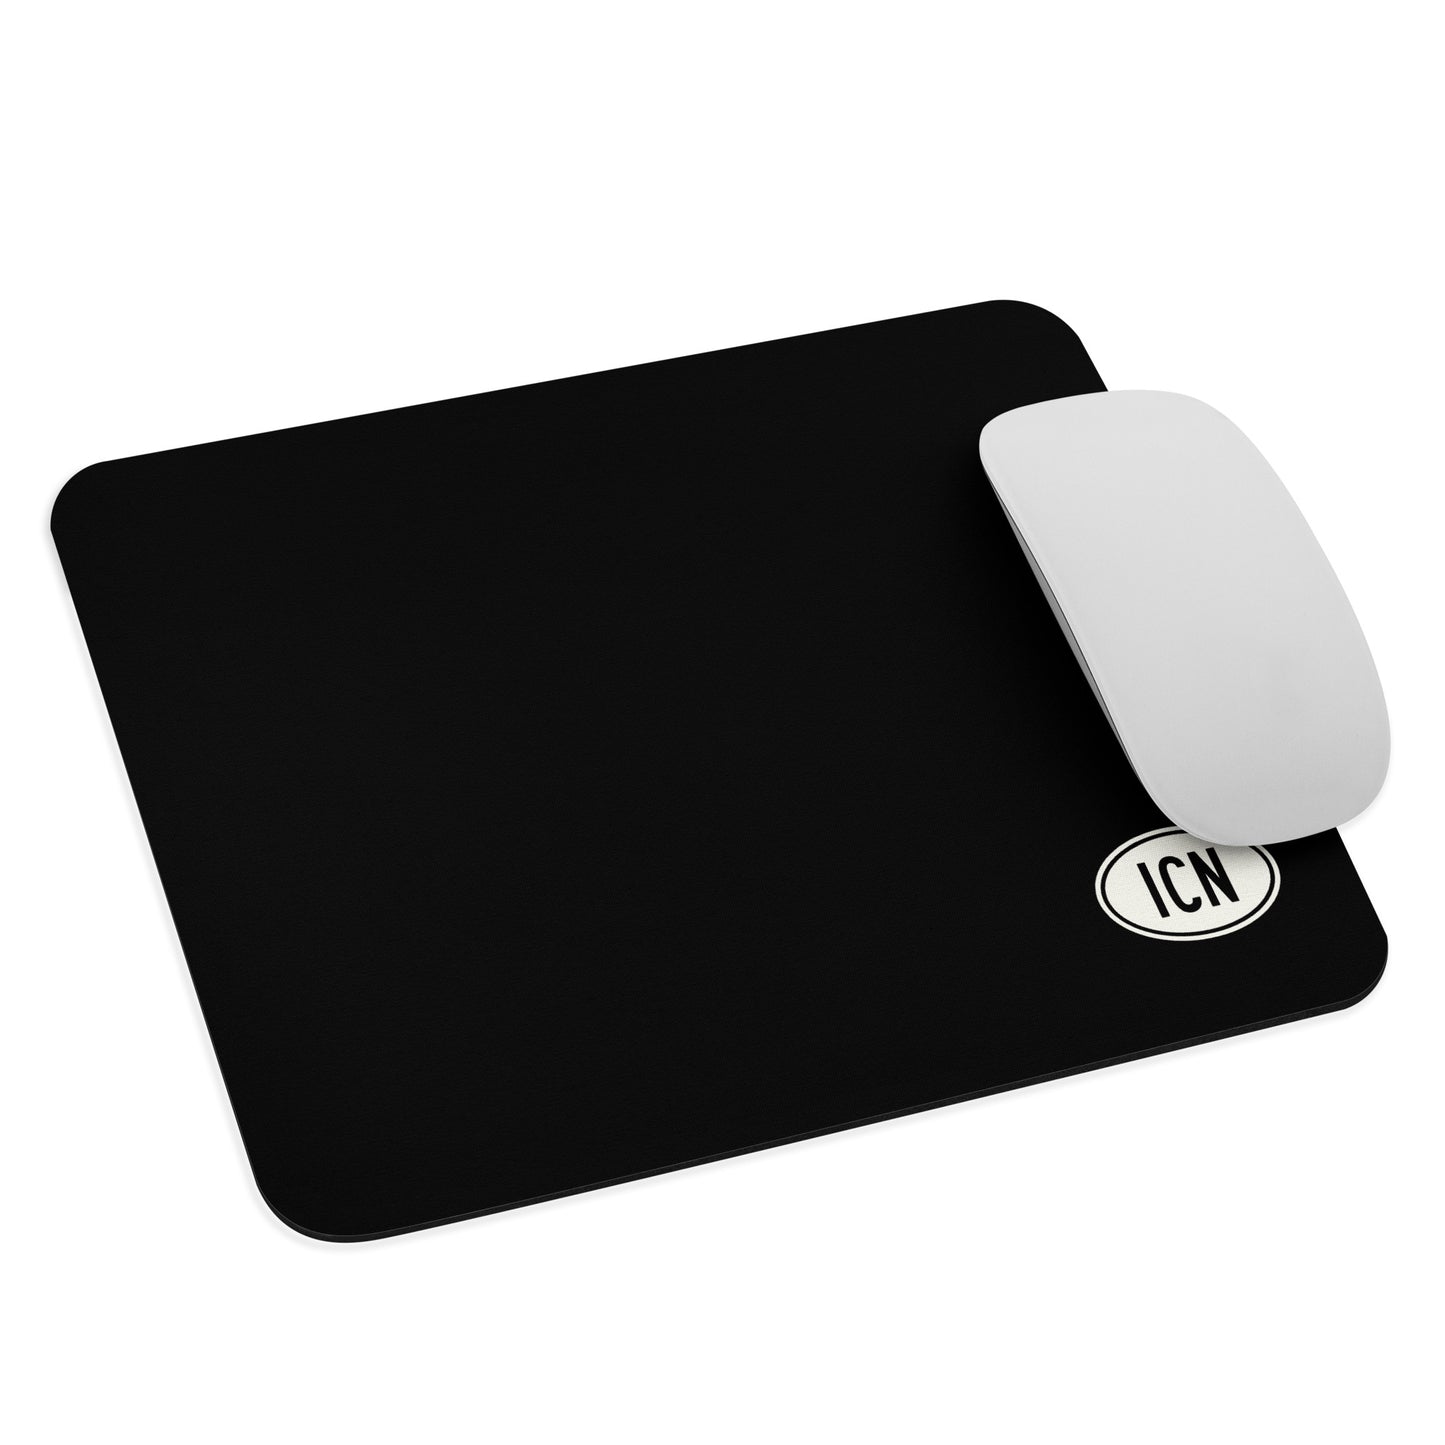 Unique Travel Gift Mouse Pad - White Oval • ICN Seoul • YHM Designs - Image 03